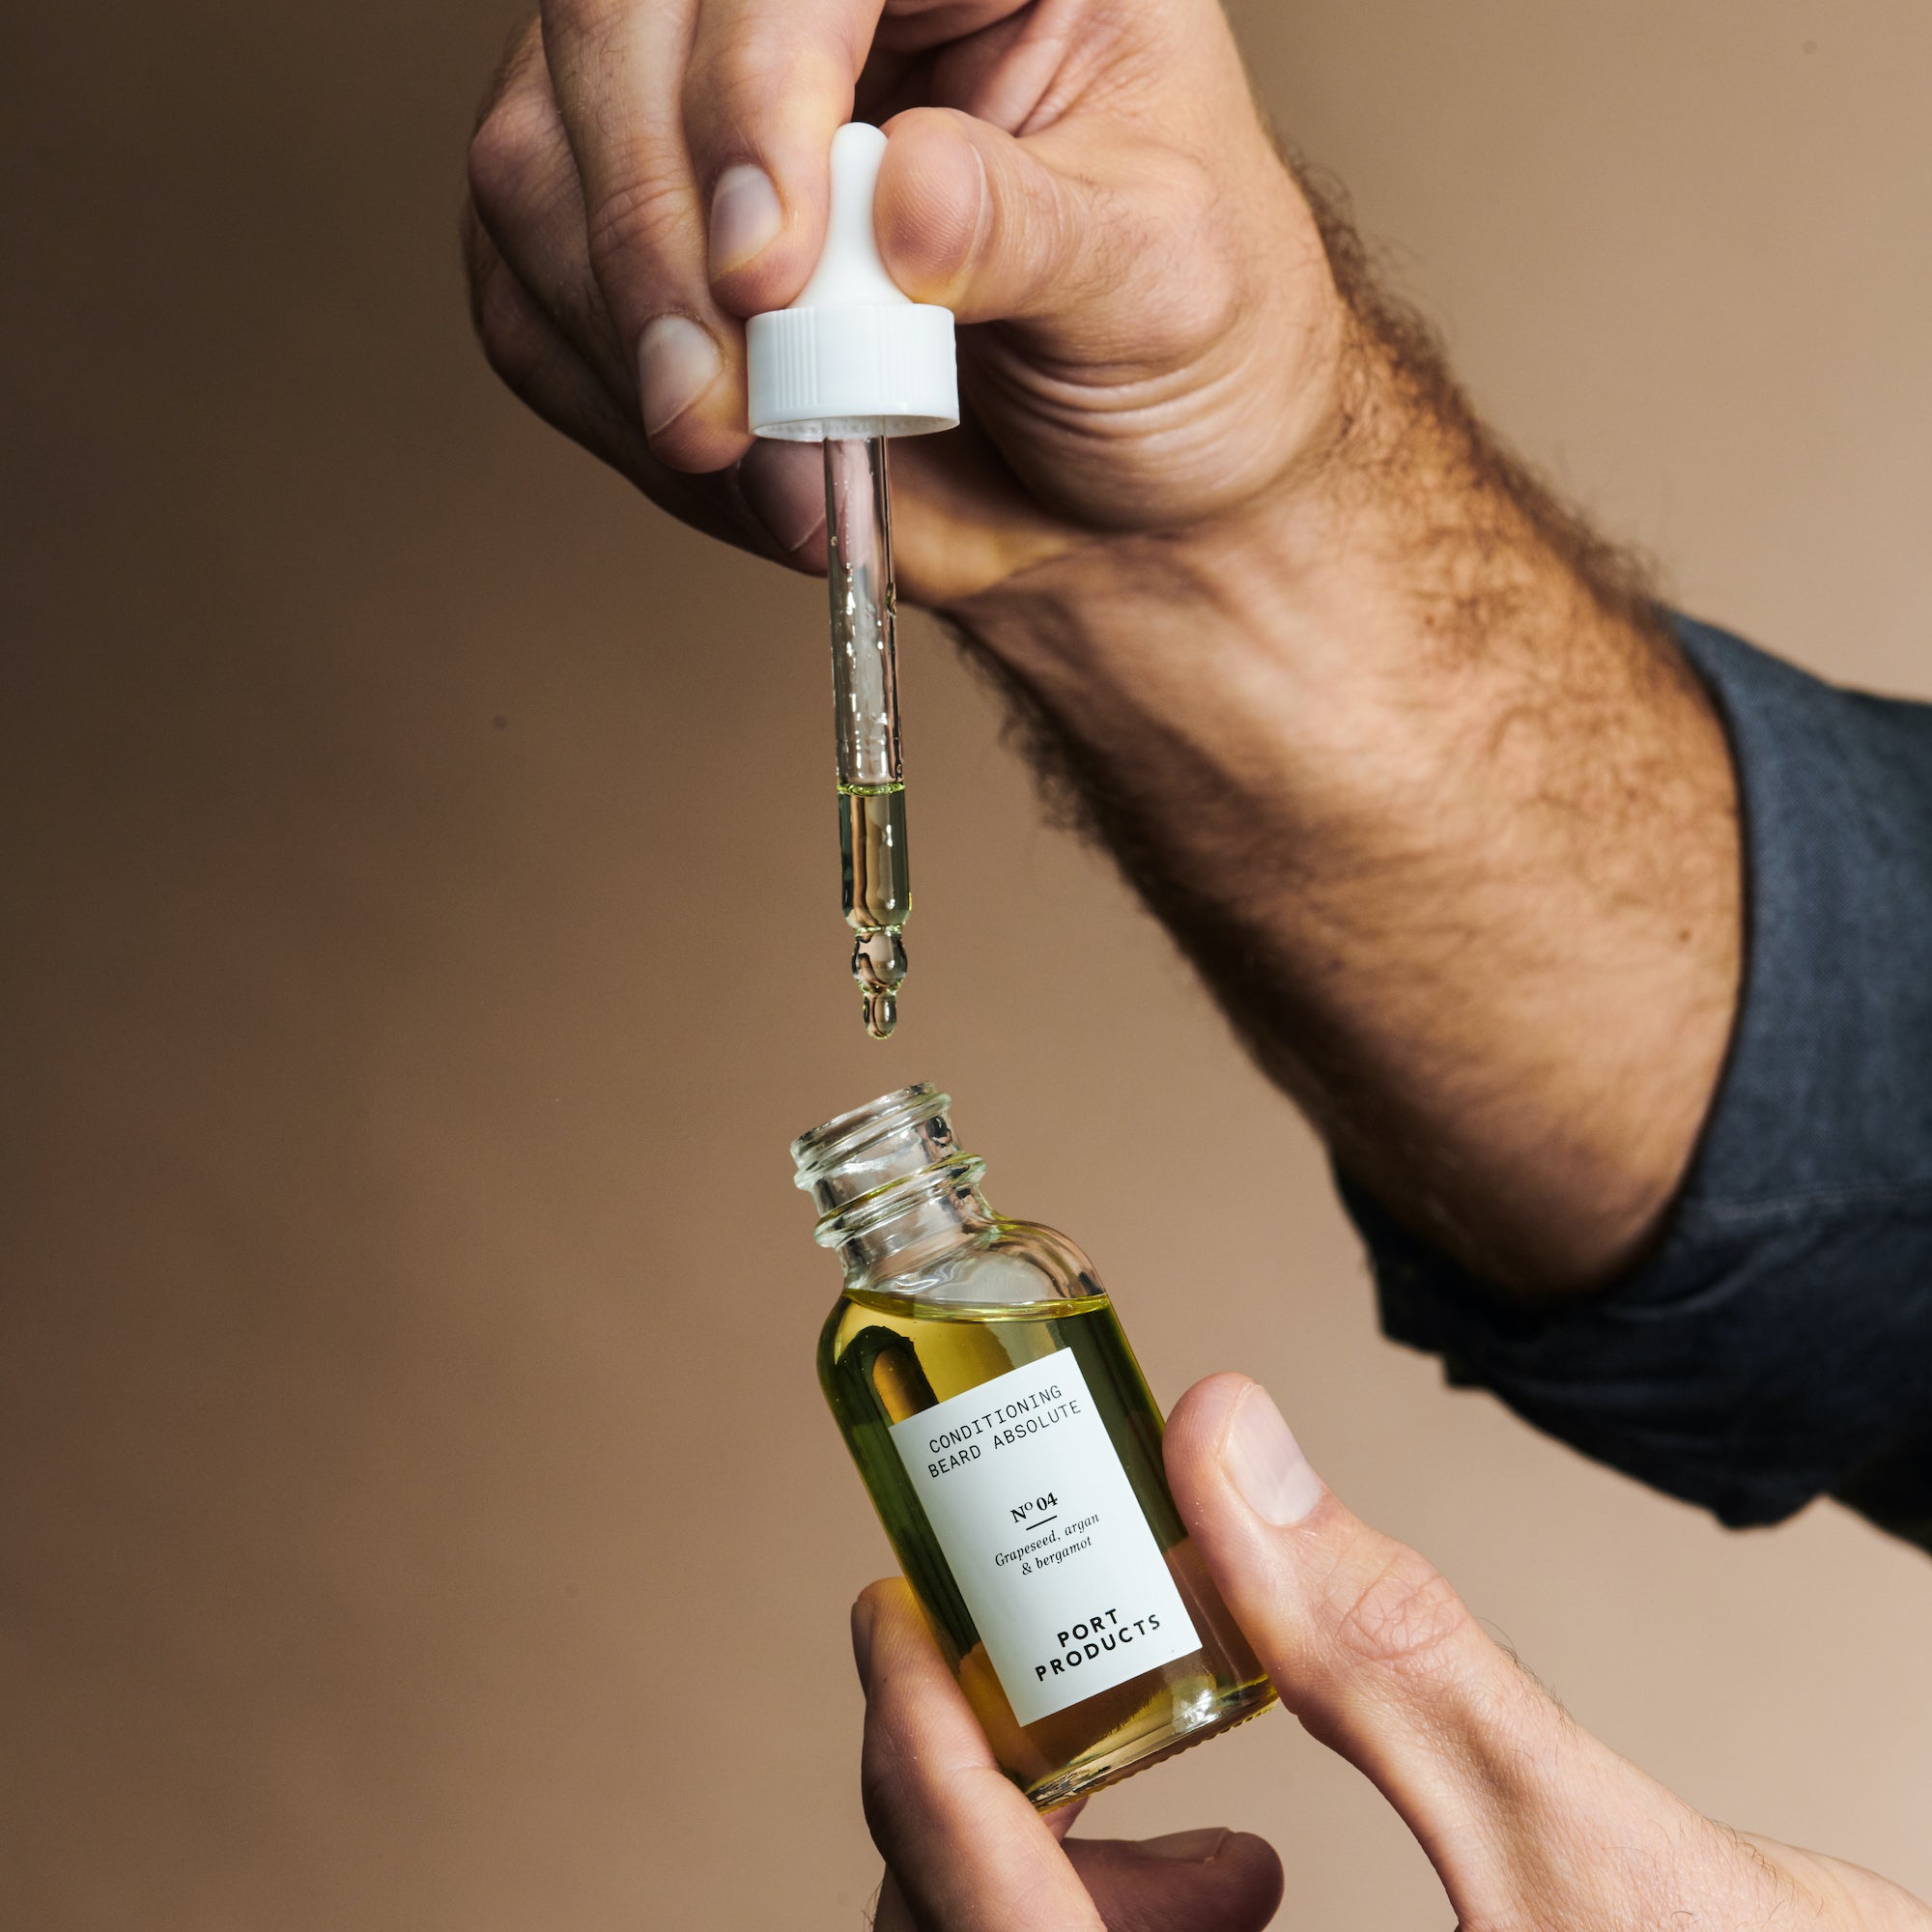 Port Products Conditioning Beard Absolute bottle and dropper in man's hands. White dropper lifted out of bottle to show gold liquid in dropper